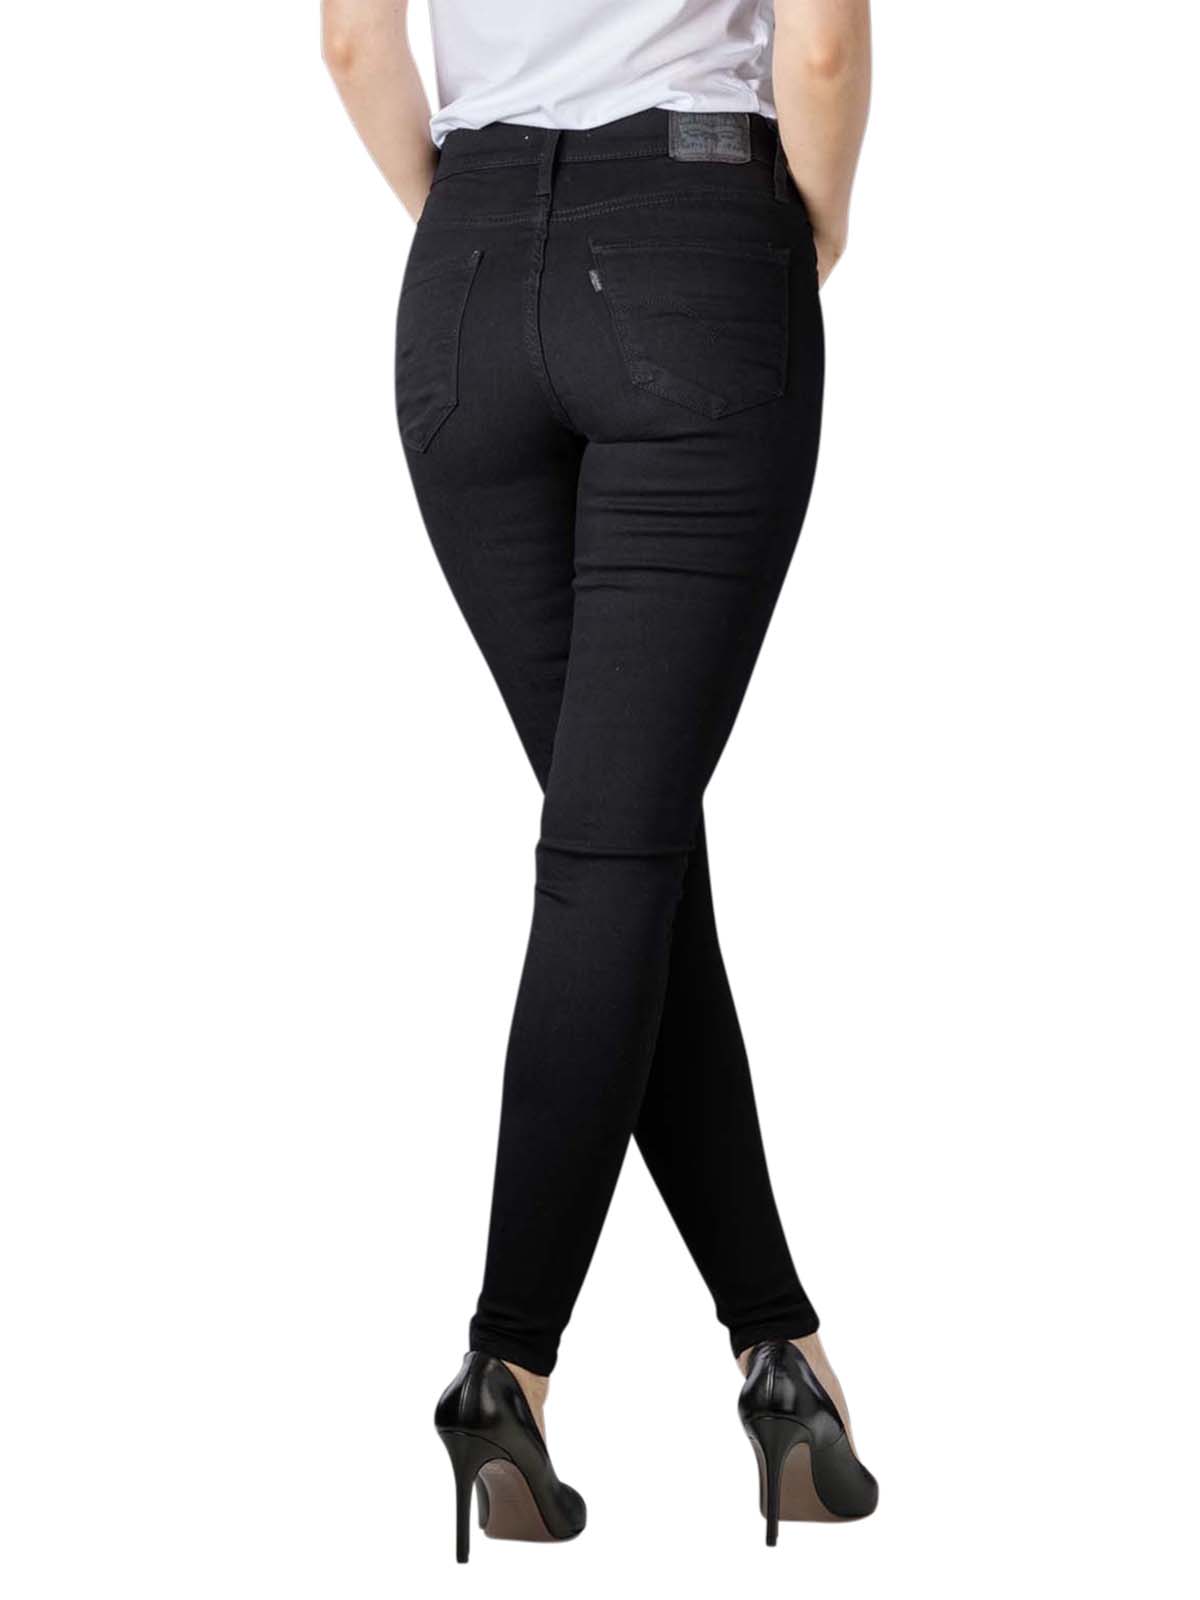 Levi's 720 Jeans High Rise Super Skinny black squared Levi's Women's Jeans  | Free Shipping on  - SIMPLY LOOK GOOD